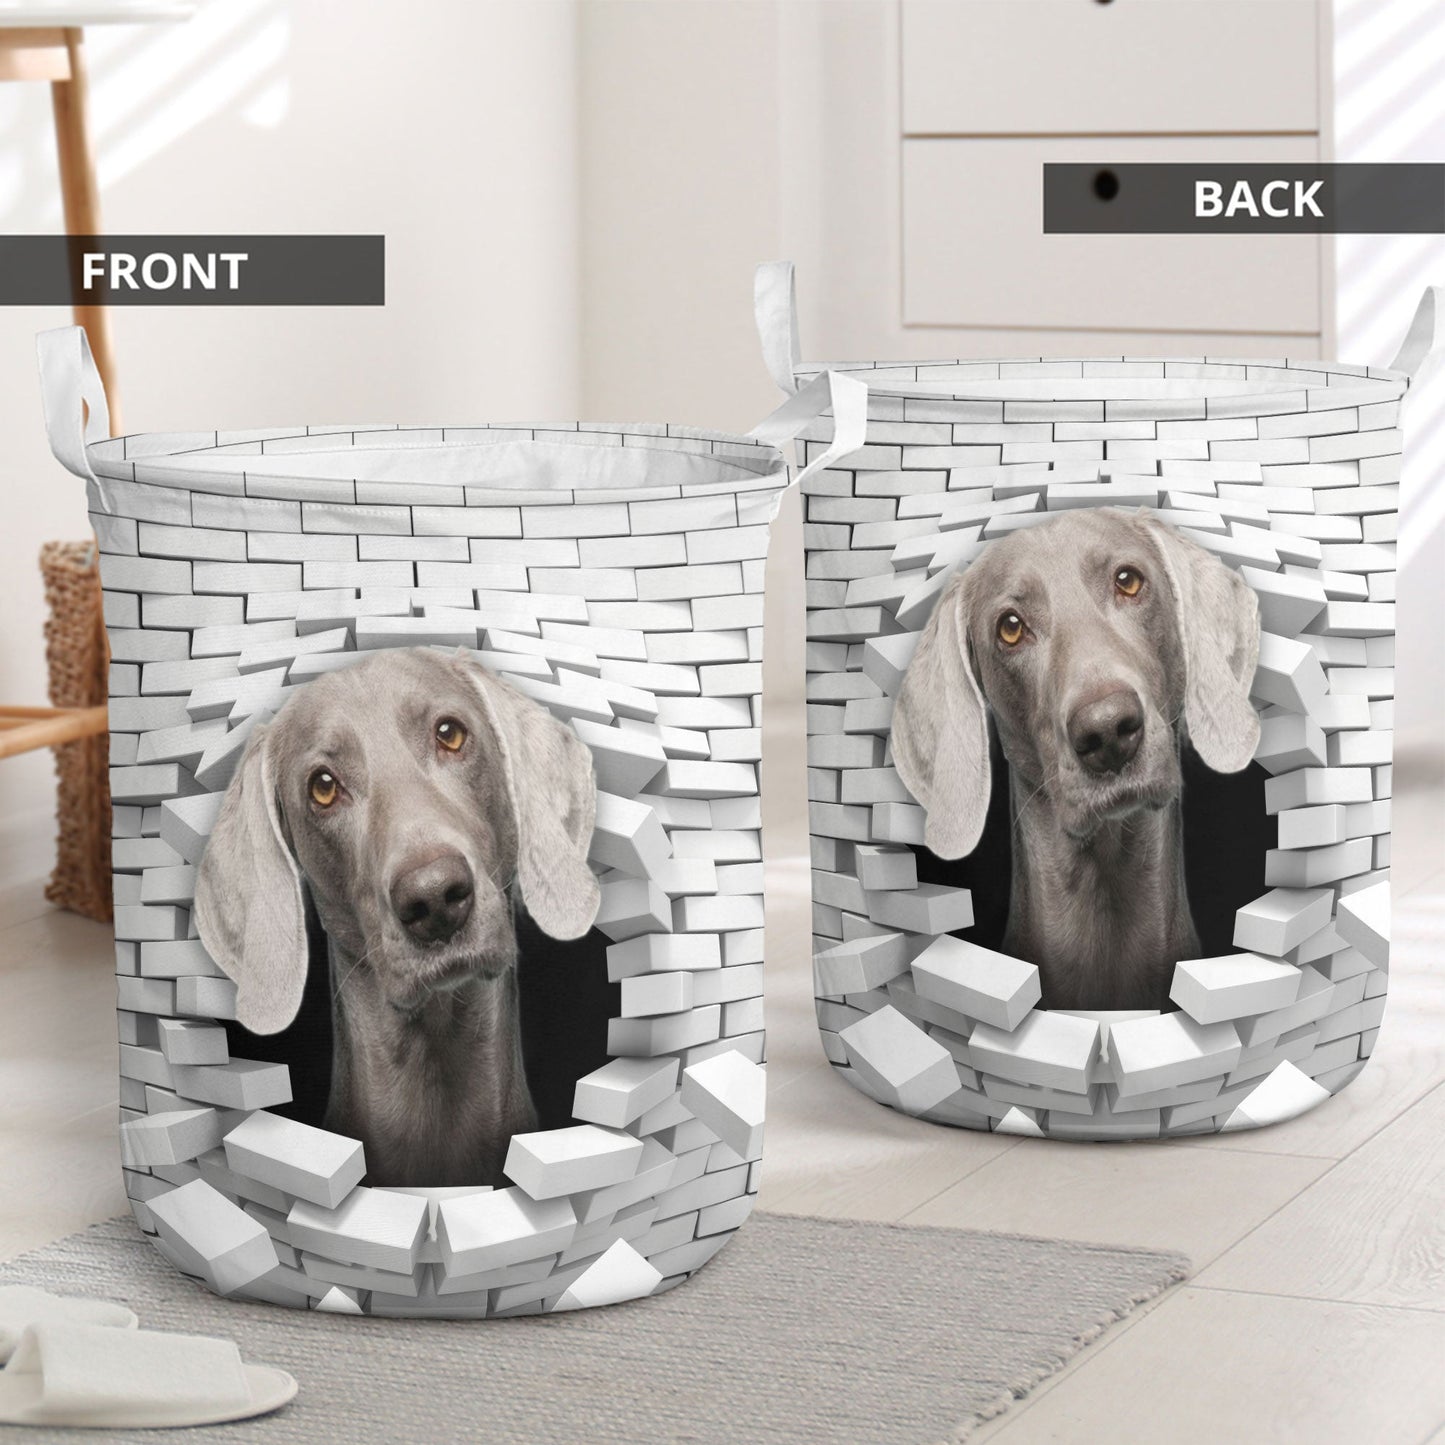 Weimaraner - In The Hole Of Wall Pattern Laundry Basket